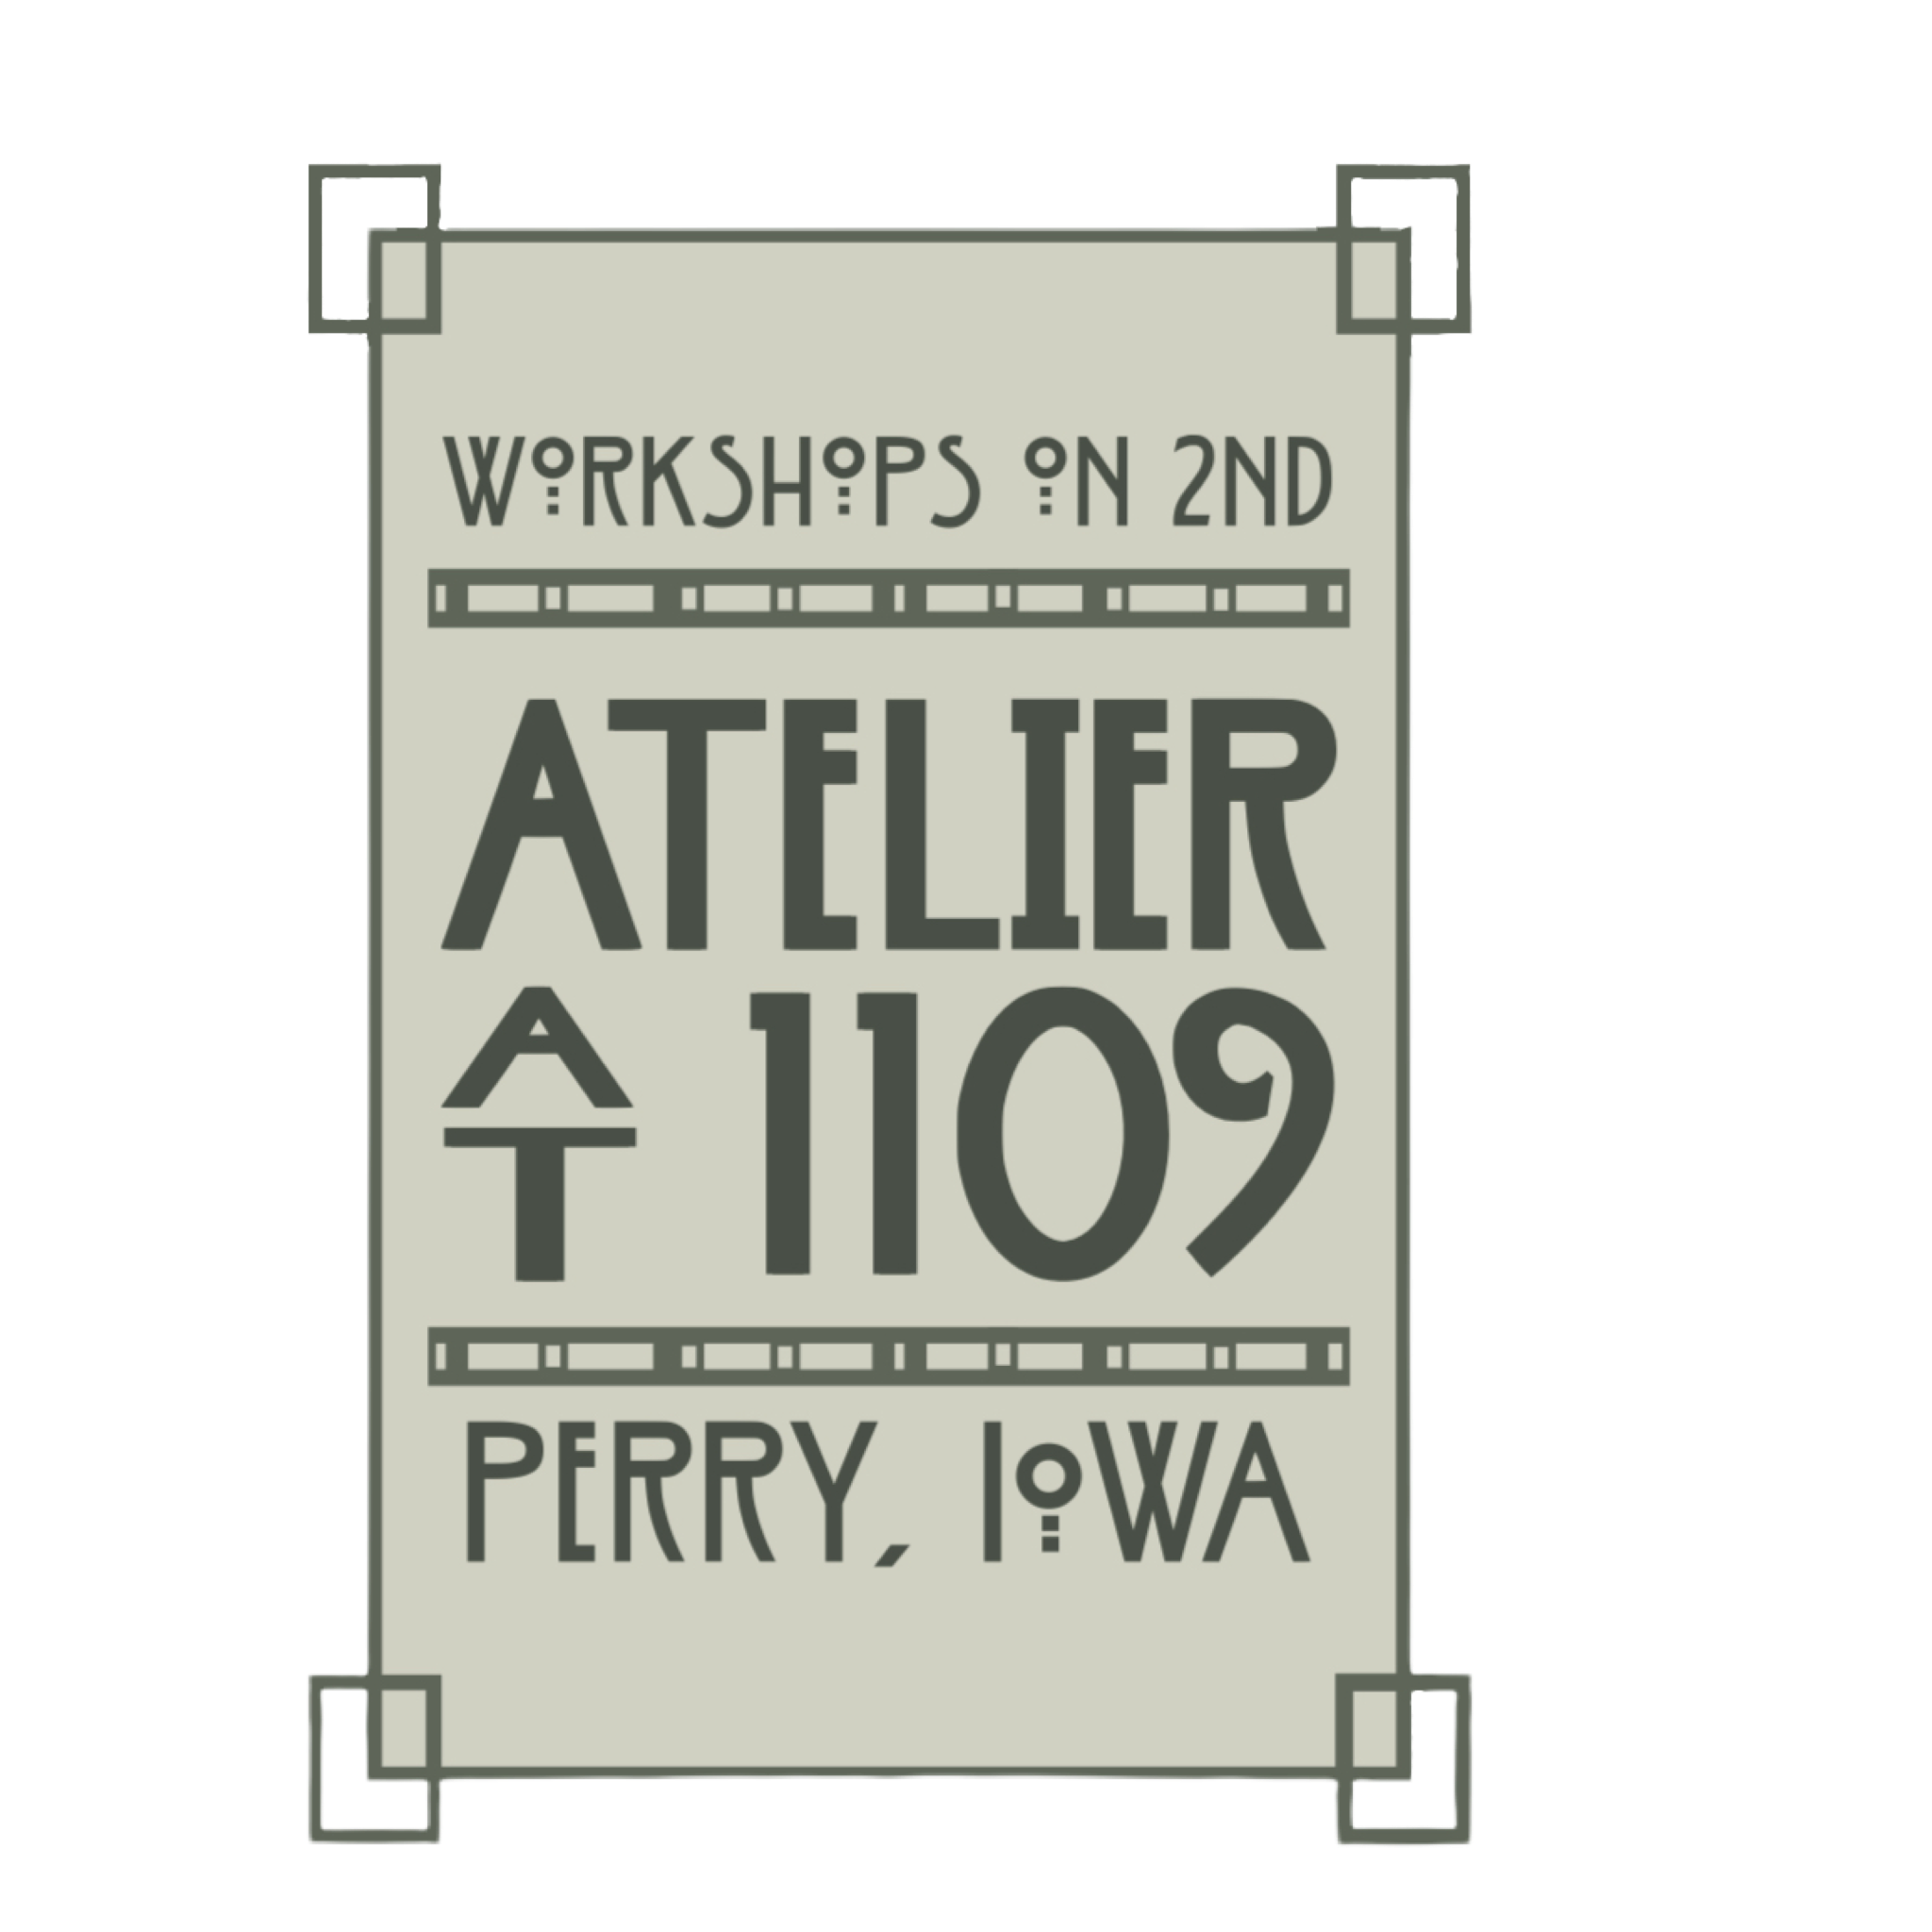 Atelier at 1109